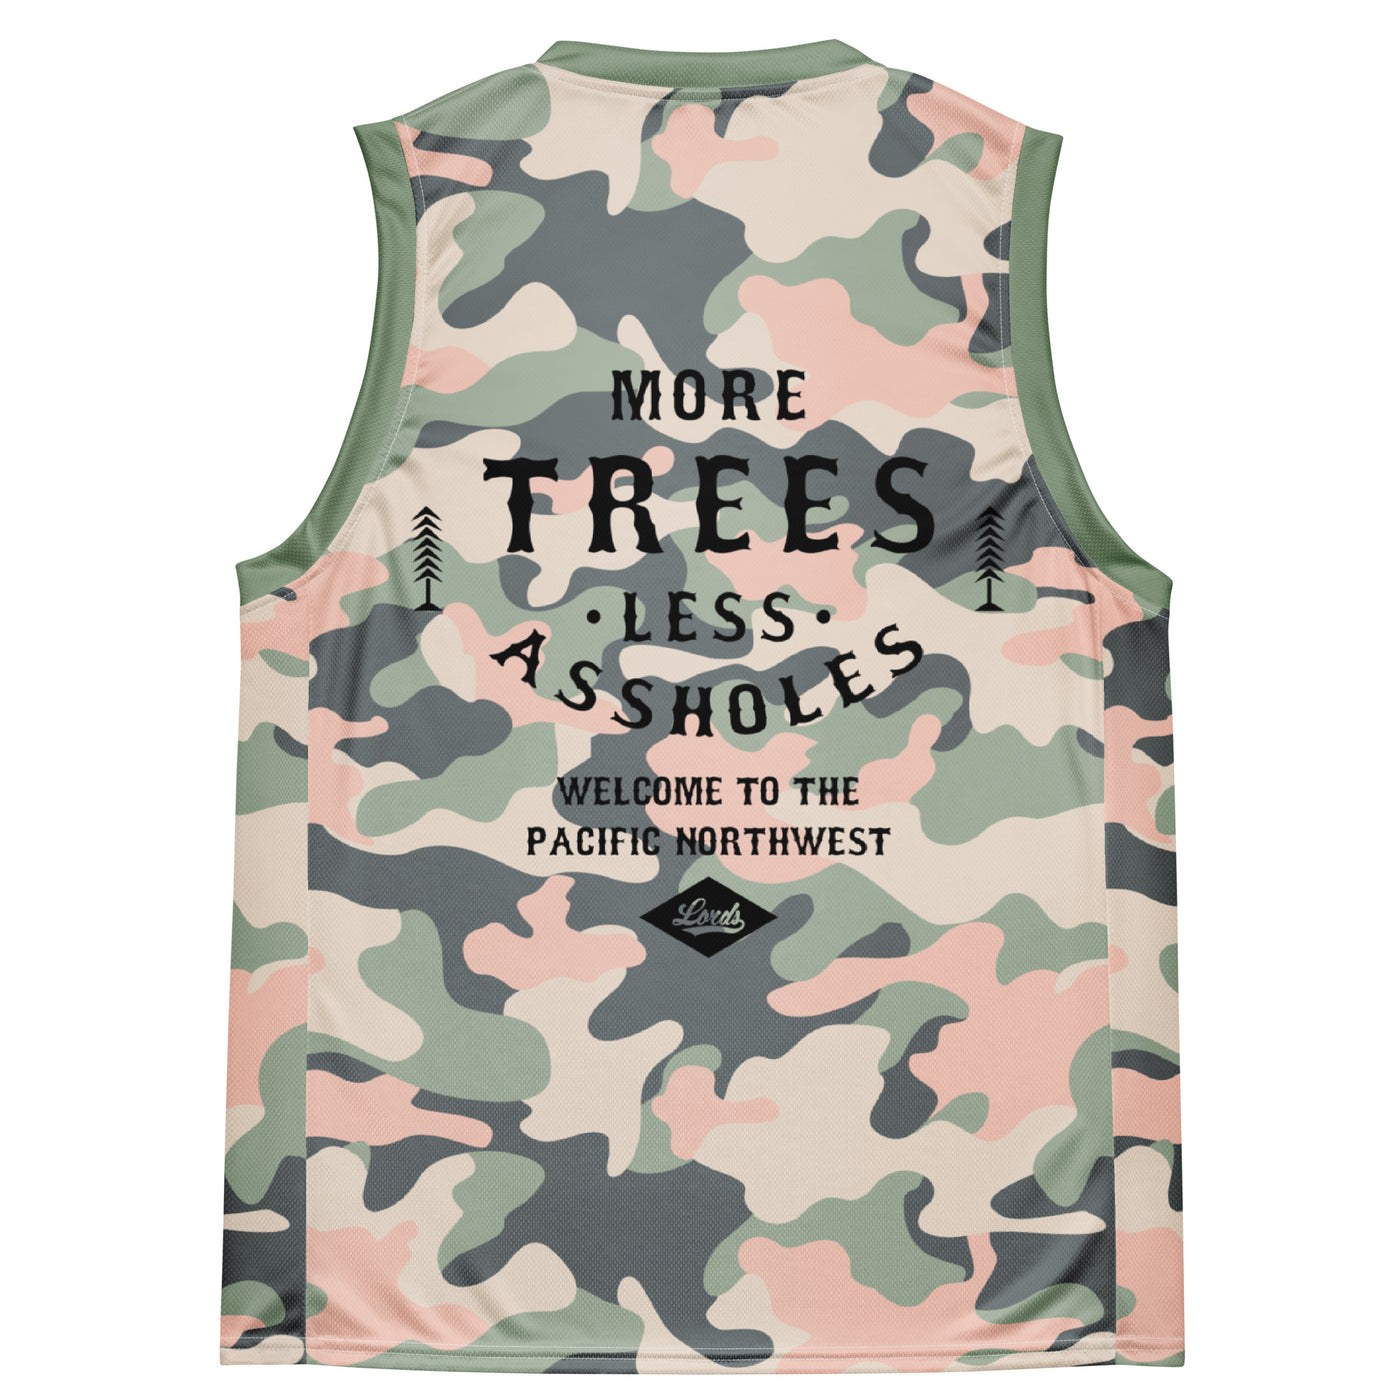 Women's Lords x More Trees Hardwood Jersey - Pink Camo